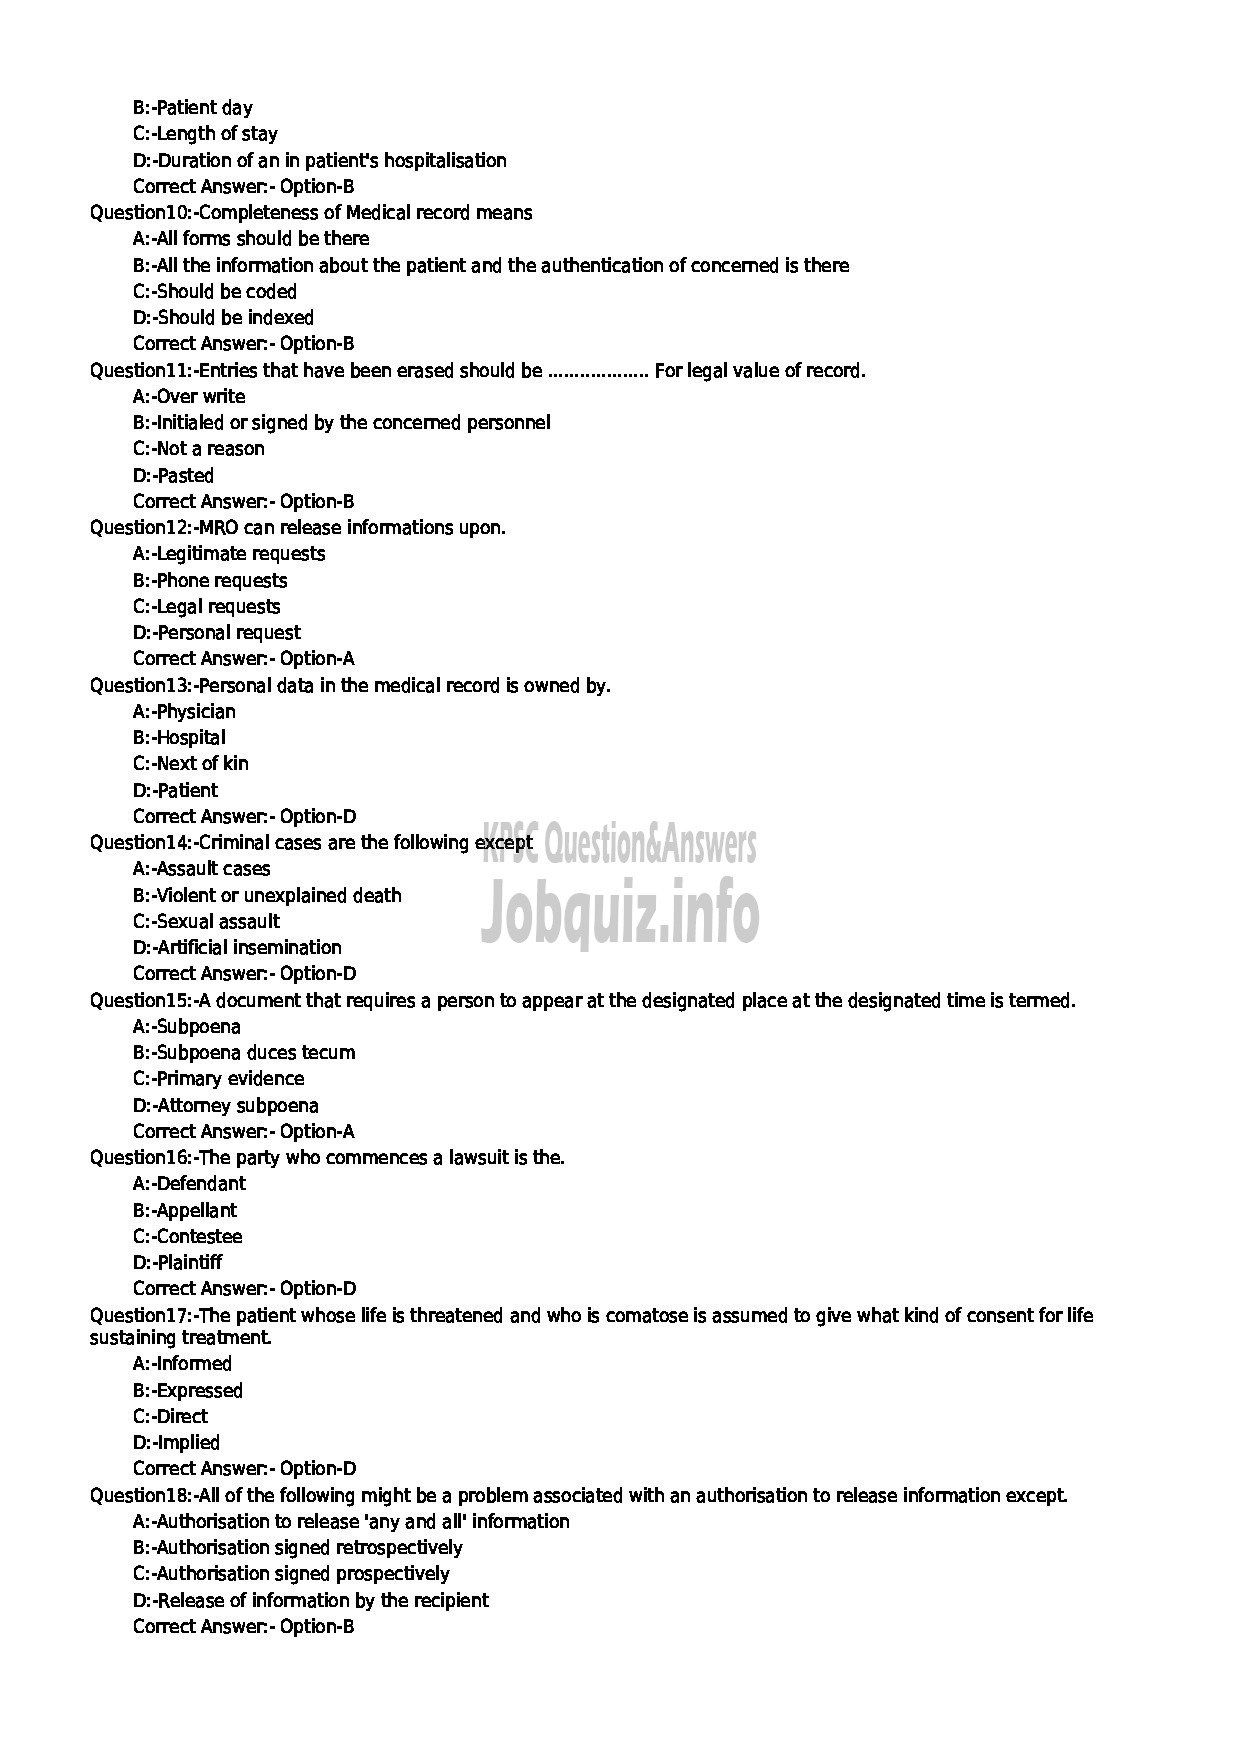 Kerala PSC Question Paper - MEDICAL RECORD LIBRARIAN GR II INSURANCE MEDICAL SERVICES-2